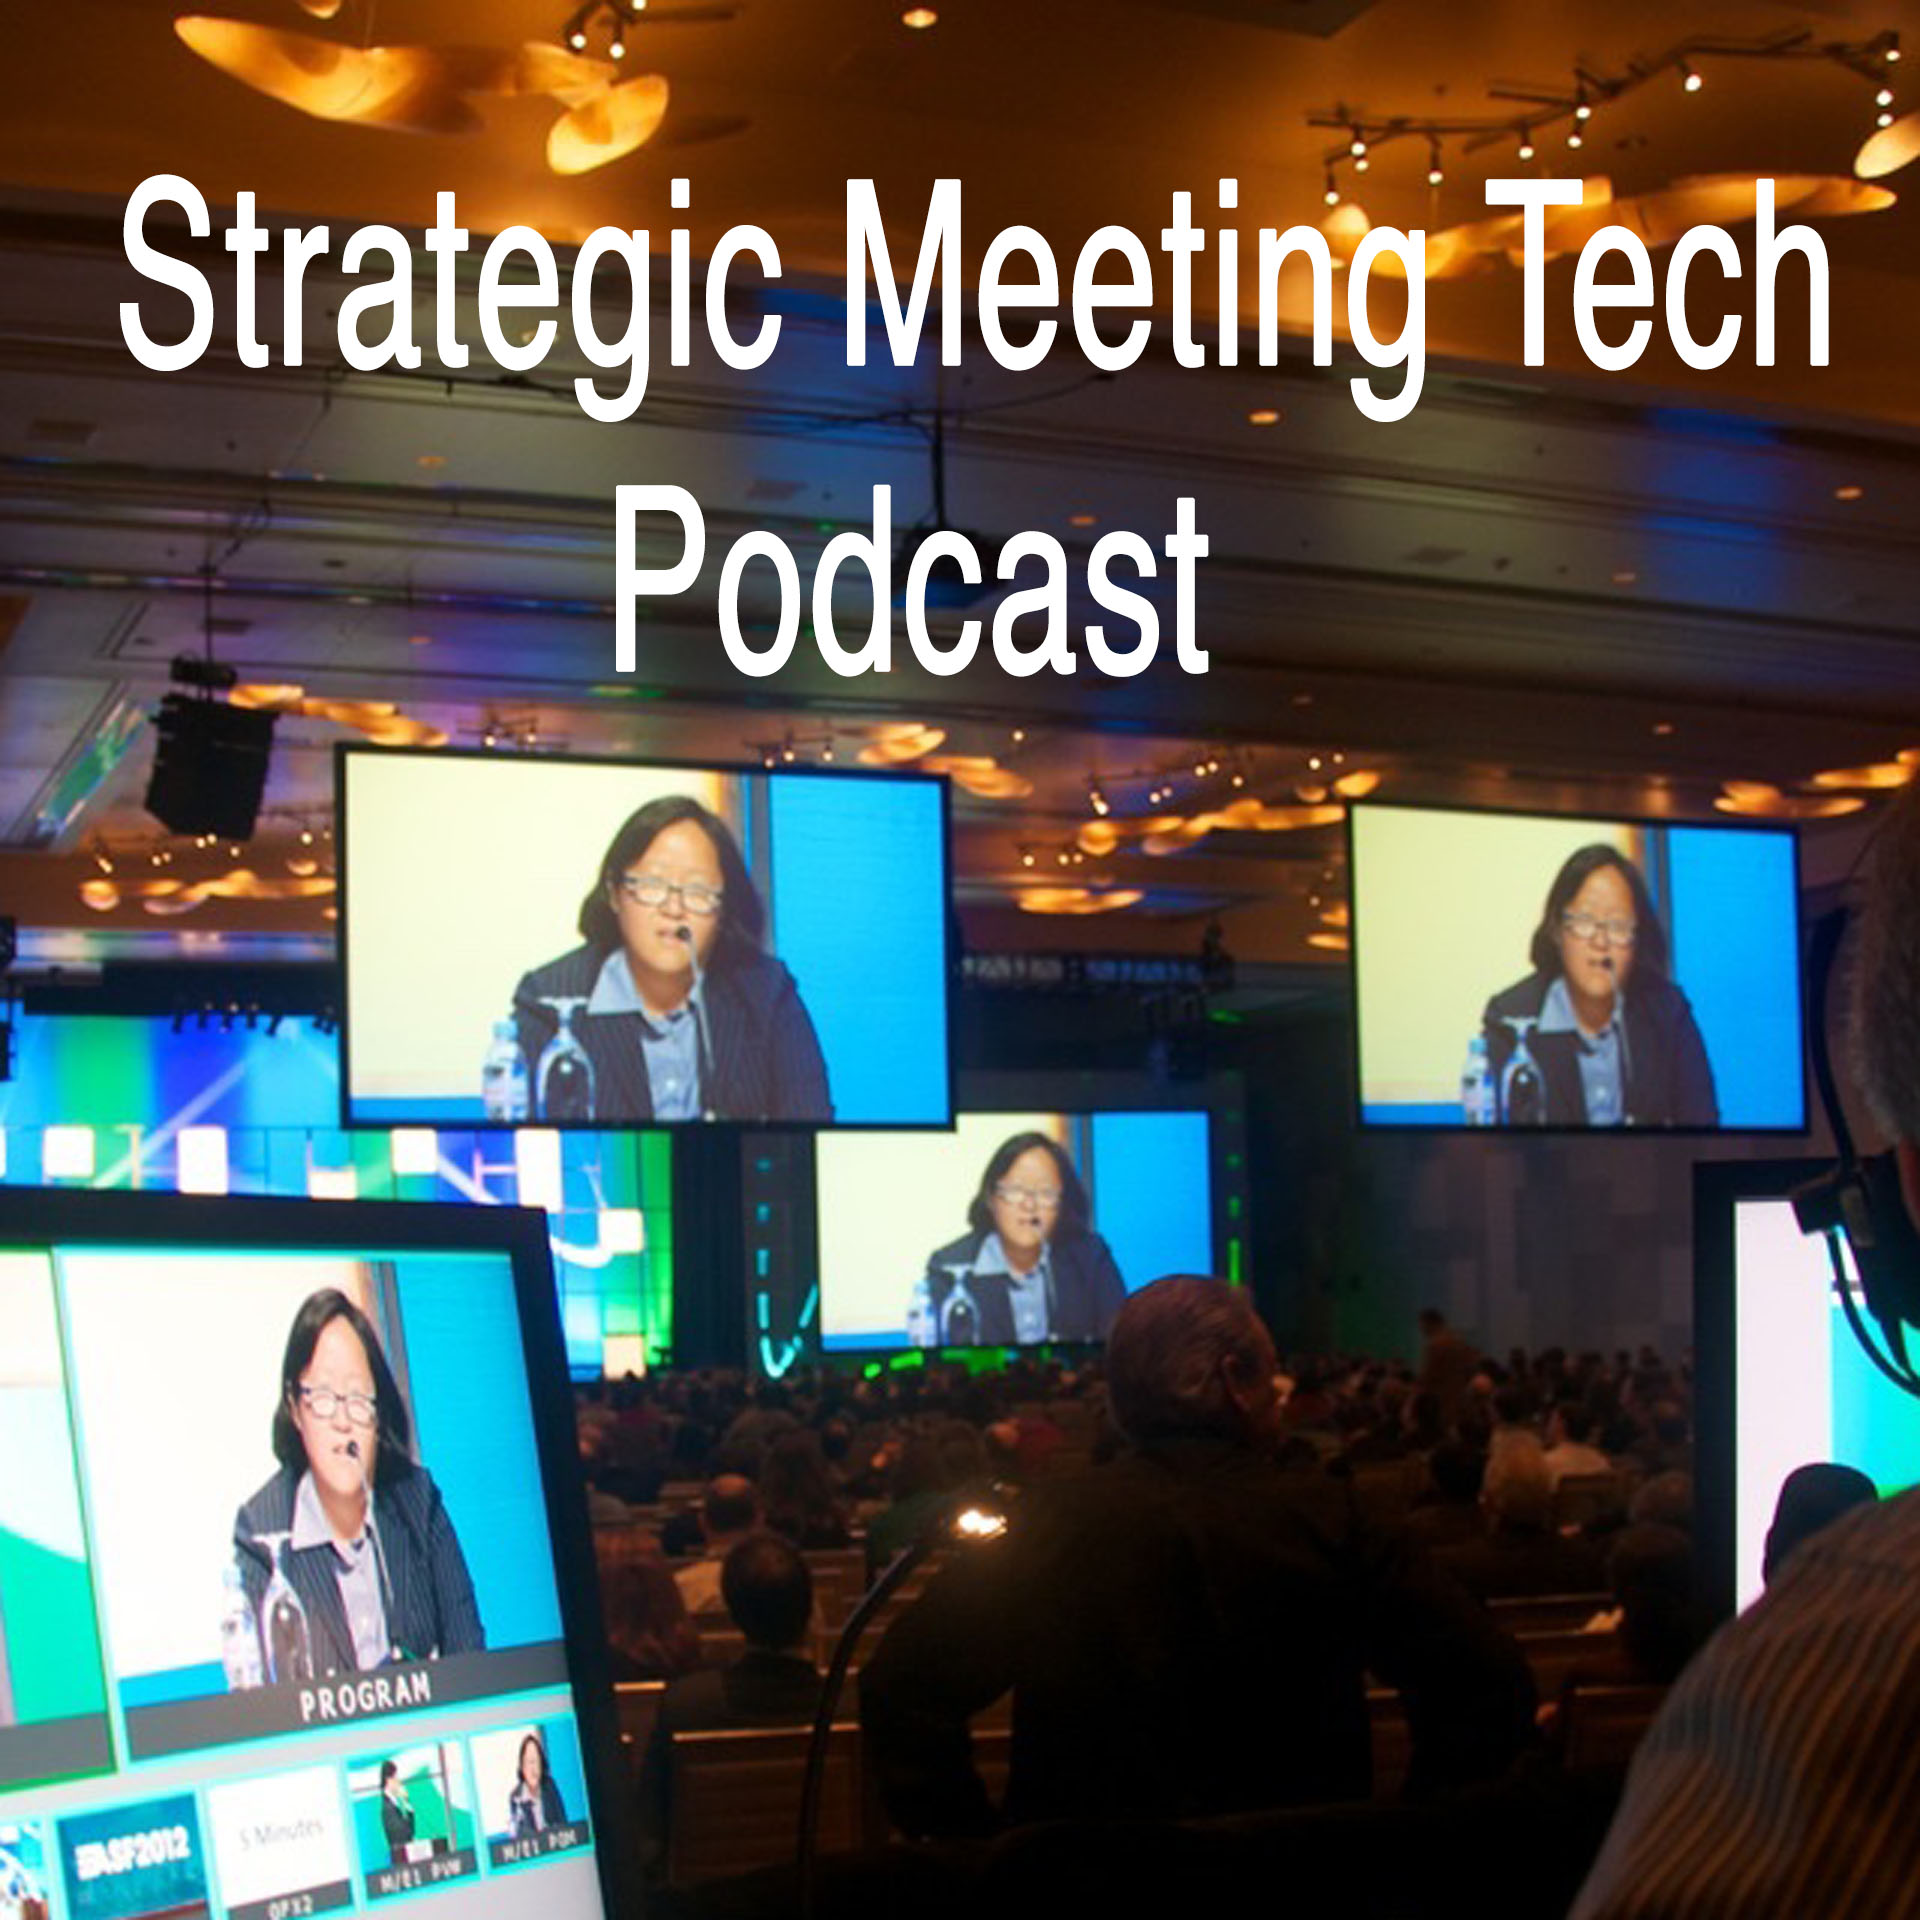 Strategic Meeting Tech Podcast Show #19 - Carol Norfleet, CMP previews “APEX Legacy Documents Workshop”, her upcoming pre-conference session at the CMP Conclave